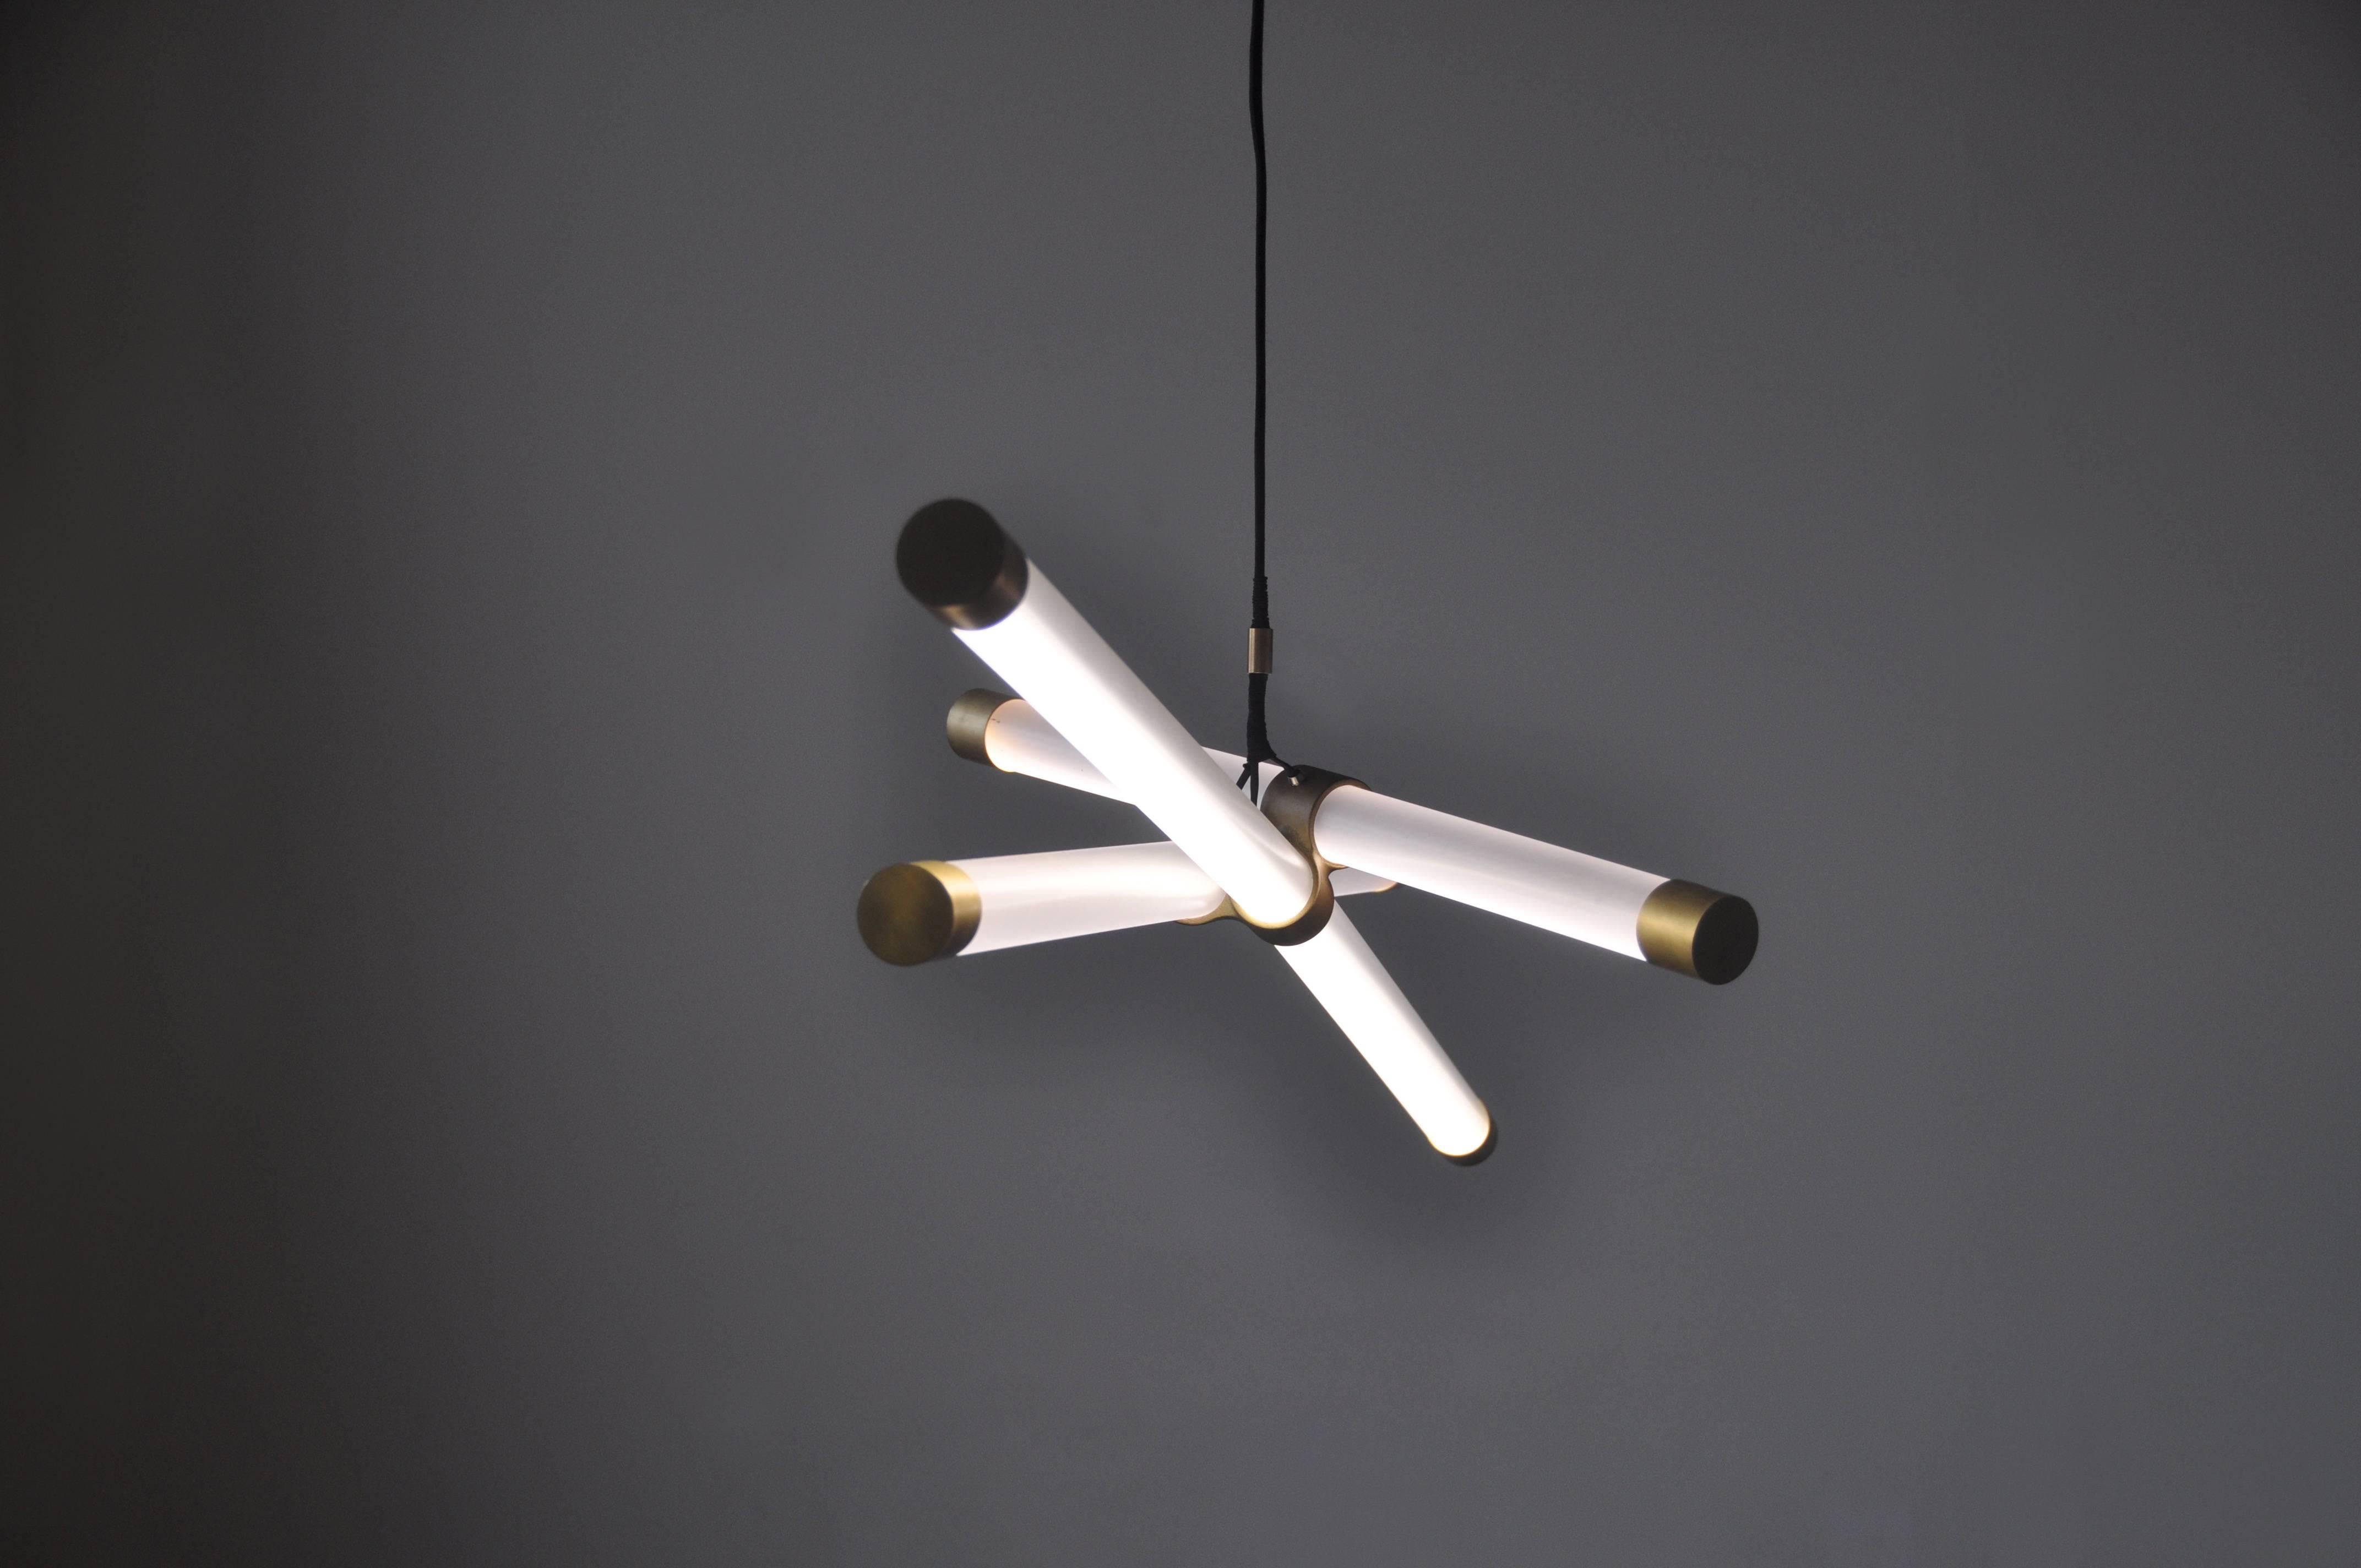 The Hanging Axis Light is a modular lighting fixture that relies on its center of gravity to maintain equilibrium. 

The brushed brass connector holds each dimmable LED tube in place while the handmade end caps create the piece visually balanced.